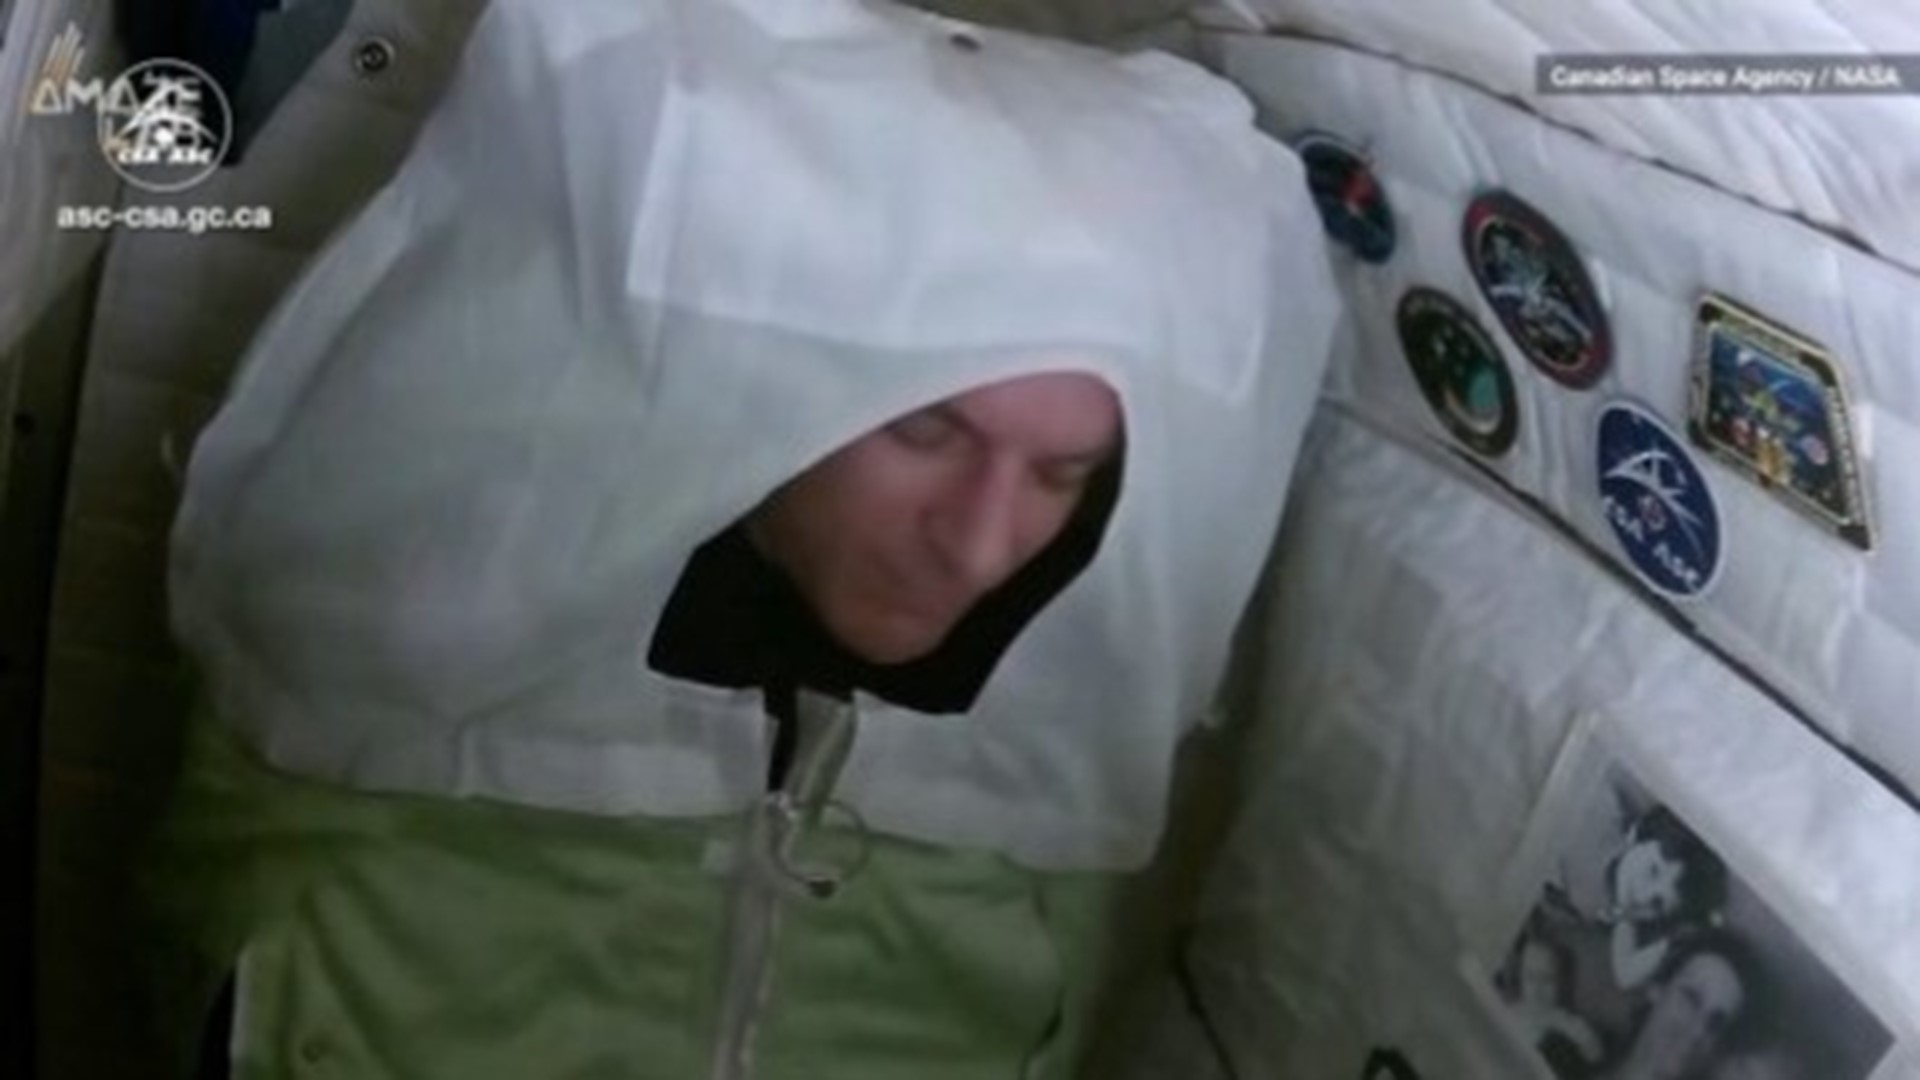 In the weightlessness of space, astronauts need to be creative to get some shut eye. Watch astronauts get ready for bed on the International Space Station.